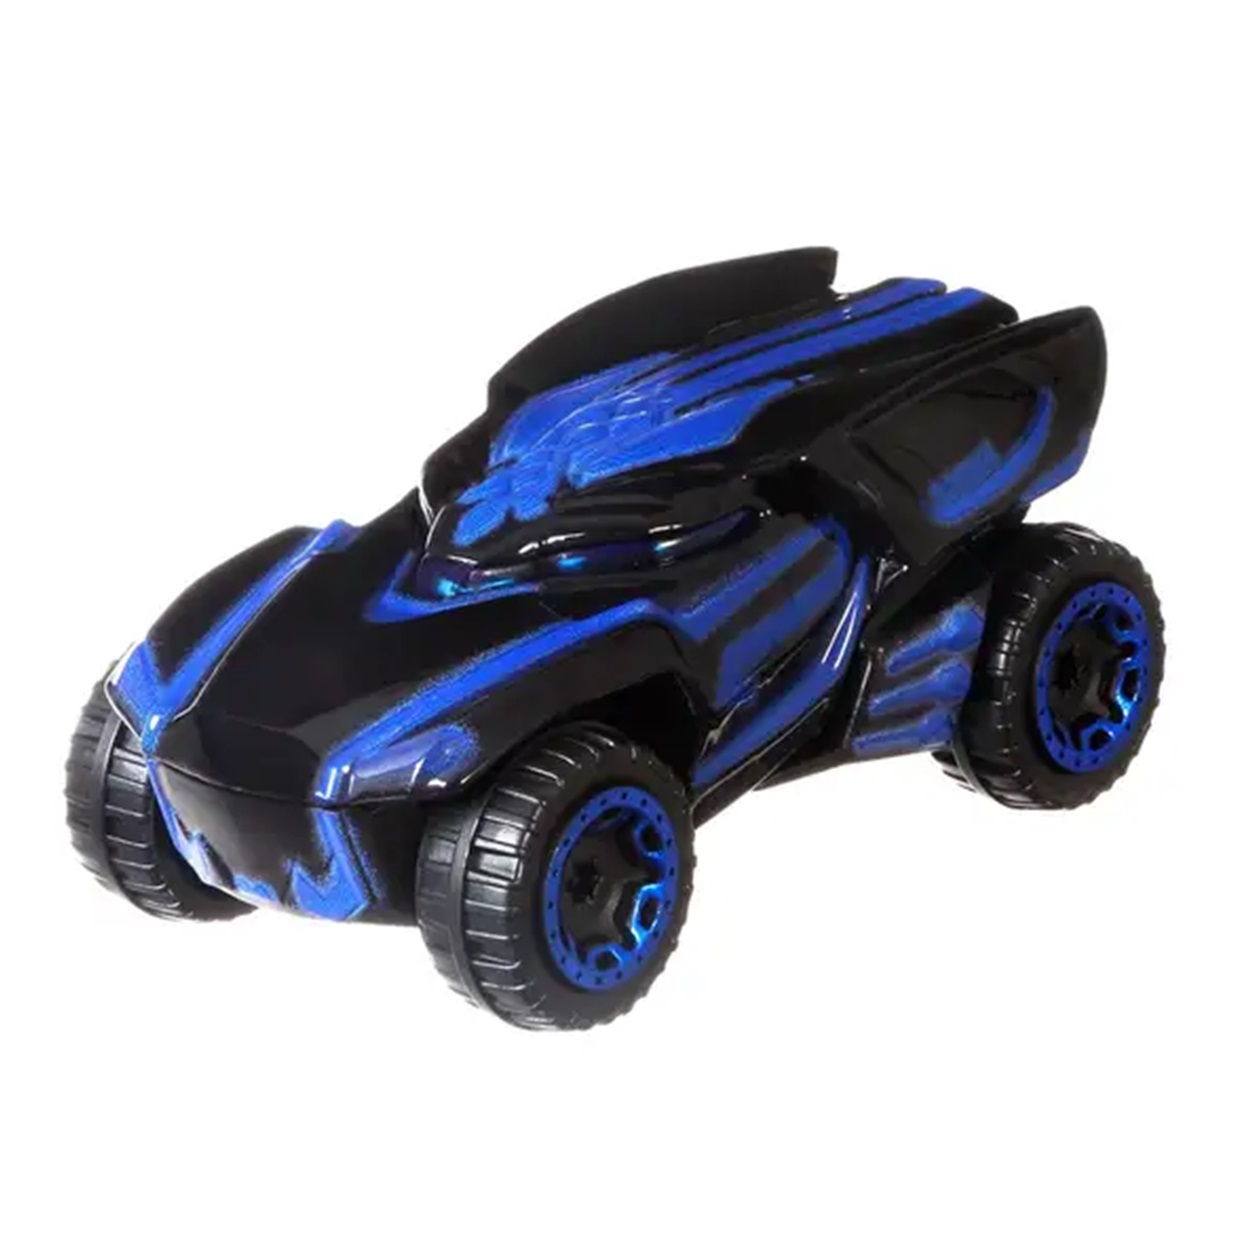 Black Panther 1/64 Hot Wheels Marvel Character Cars